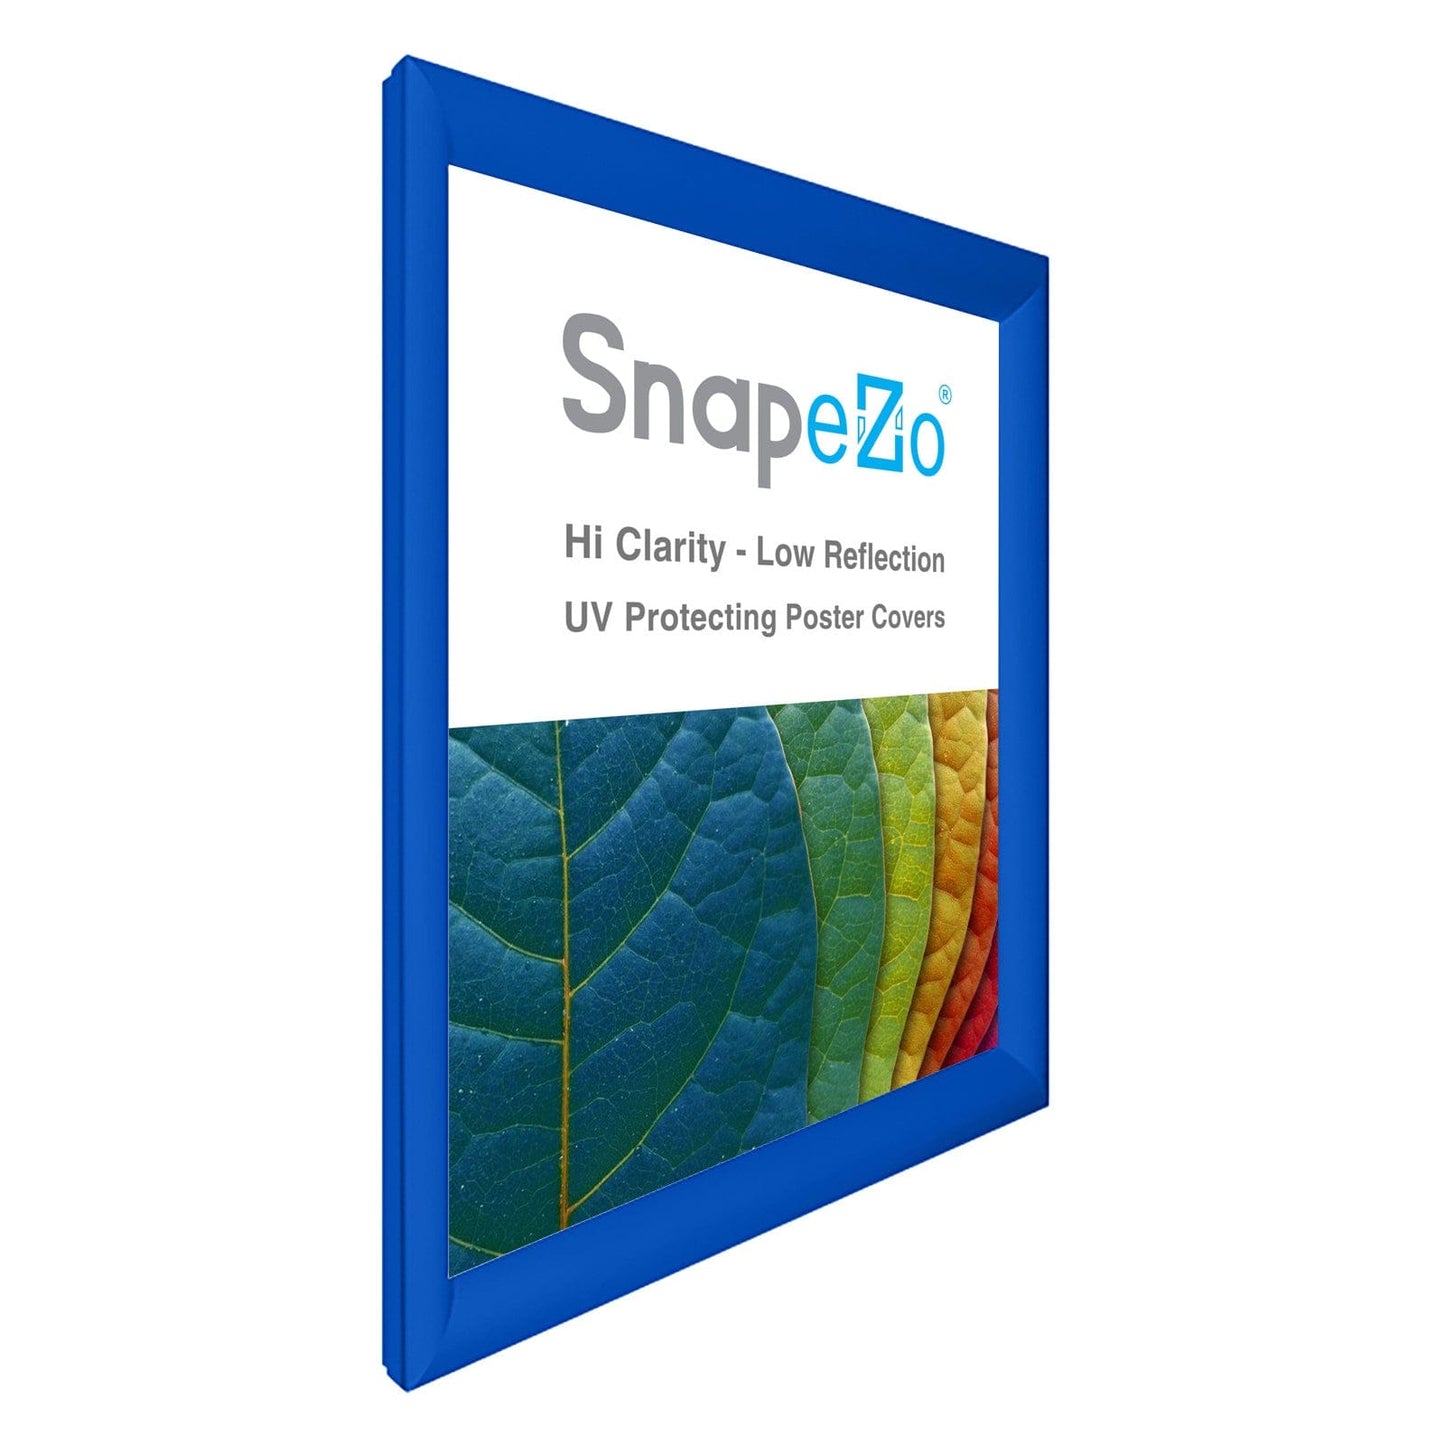 29x39 Blue SnapeZo® Snap Frame - 1.2" Profile - Snap Frames Direct